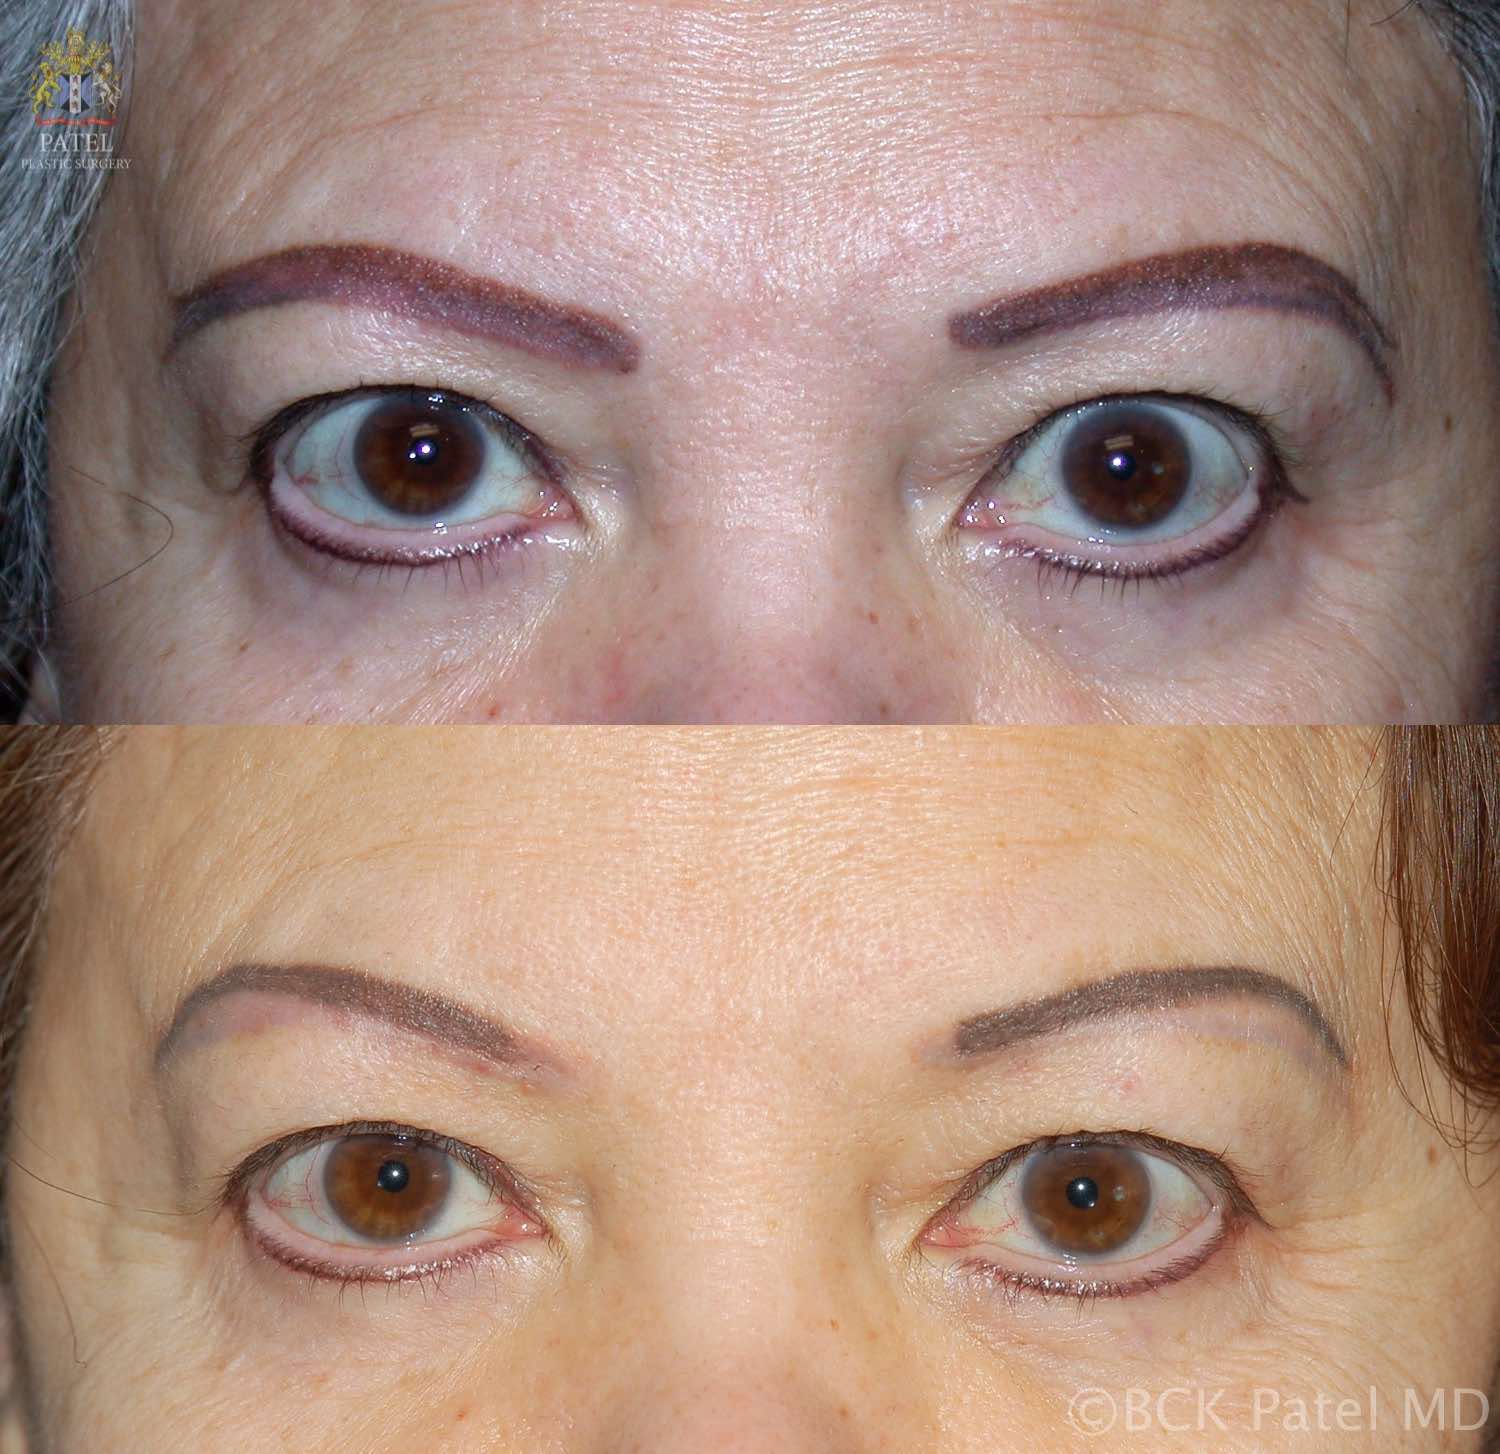 englishsurgeon.com. Photos showing a nice improvement in brow tattoos that were overdone. Lasers used. BCK Patel MD, FRCS, Salt Lake City, St George